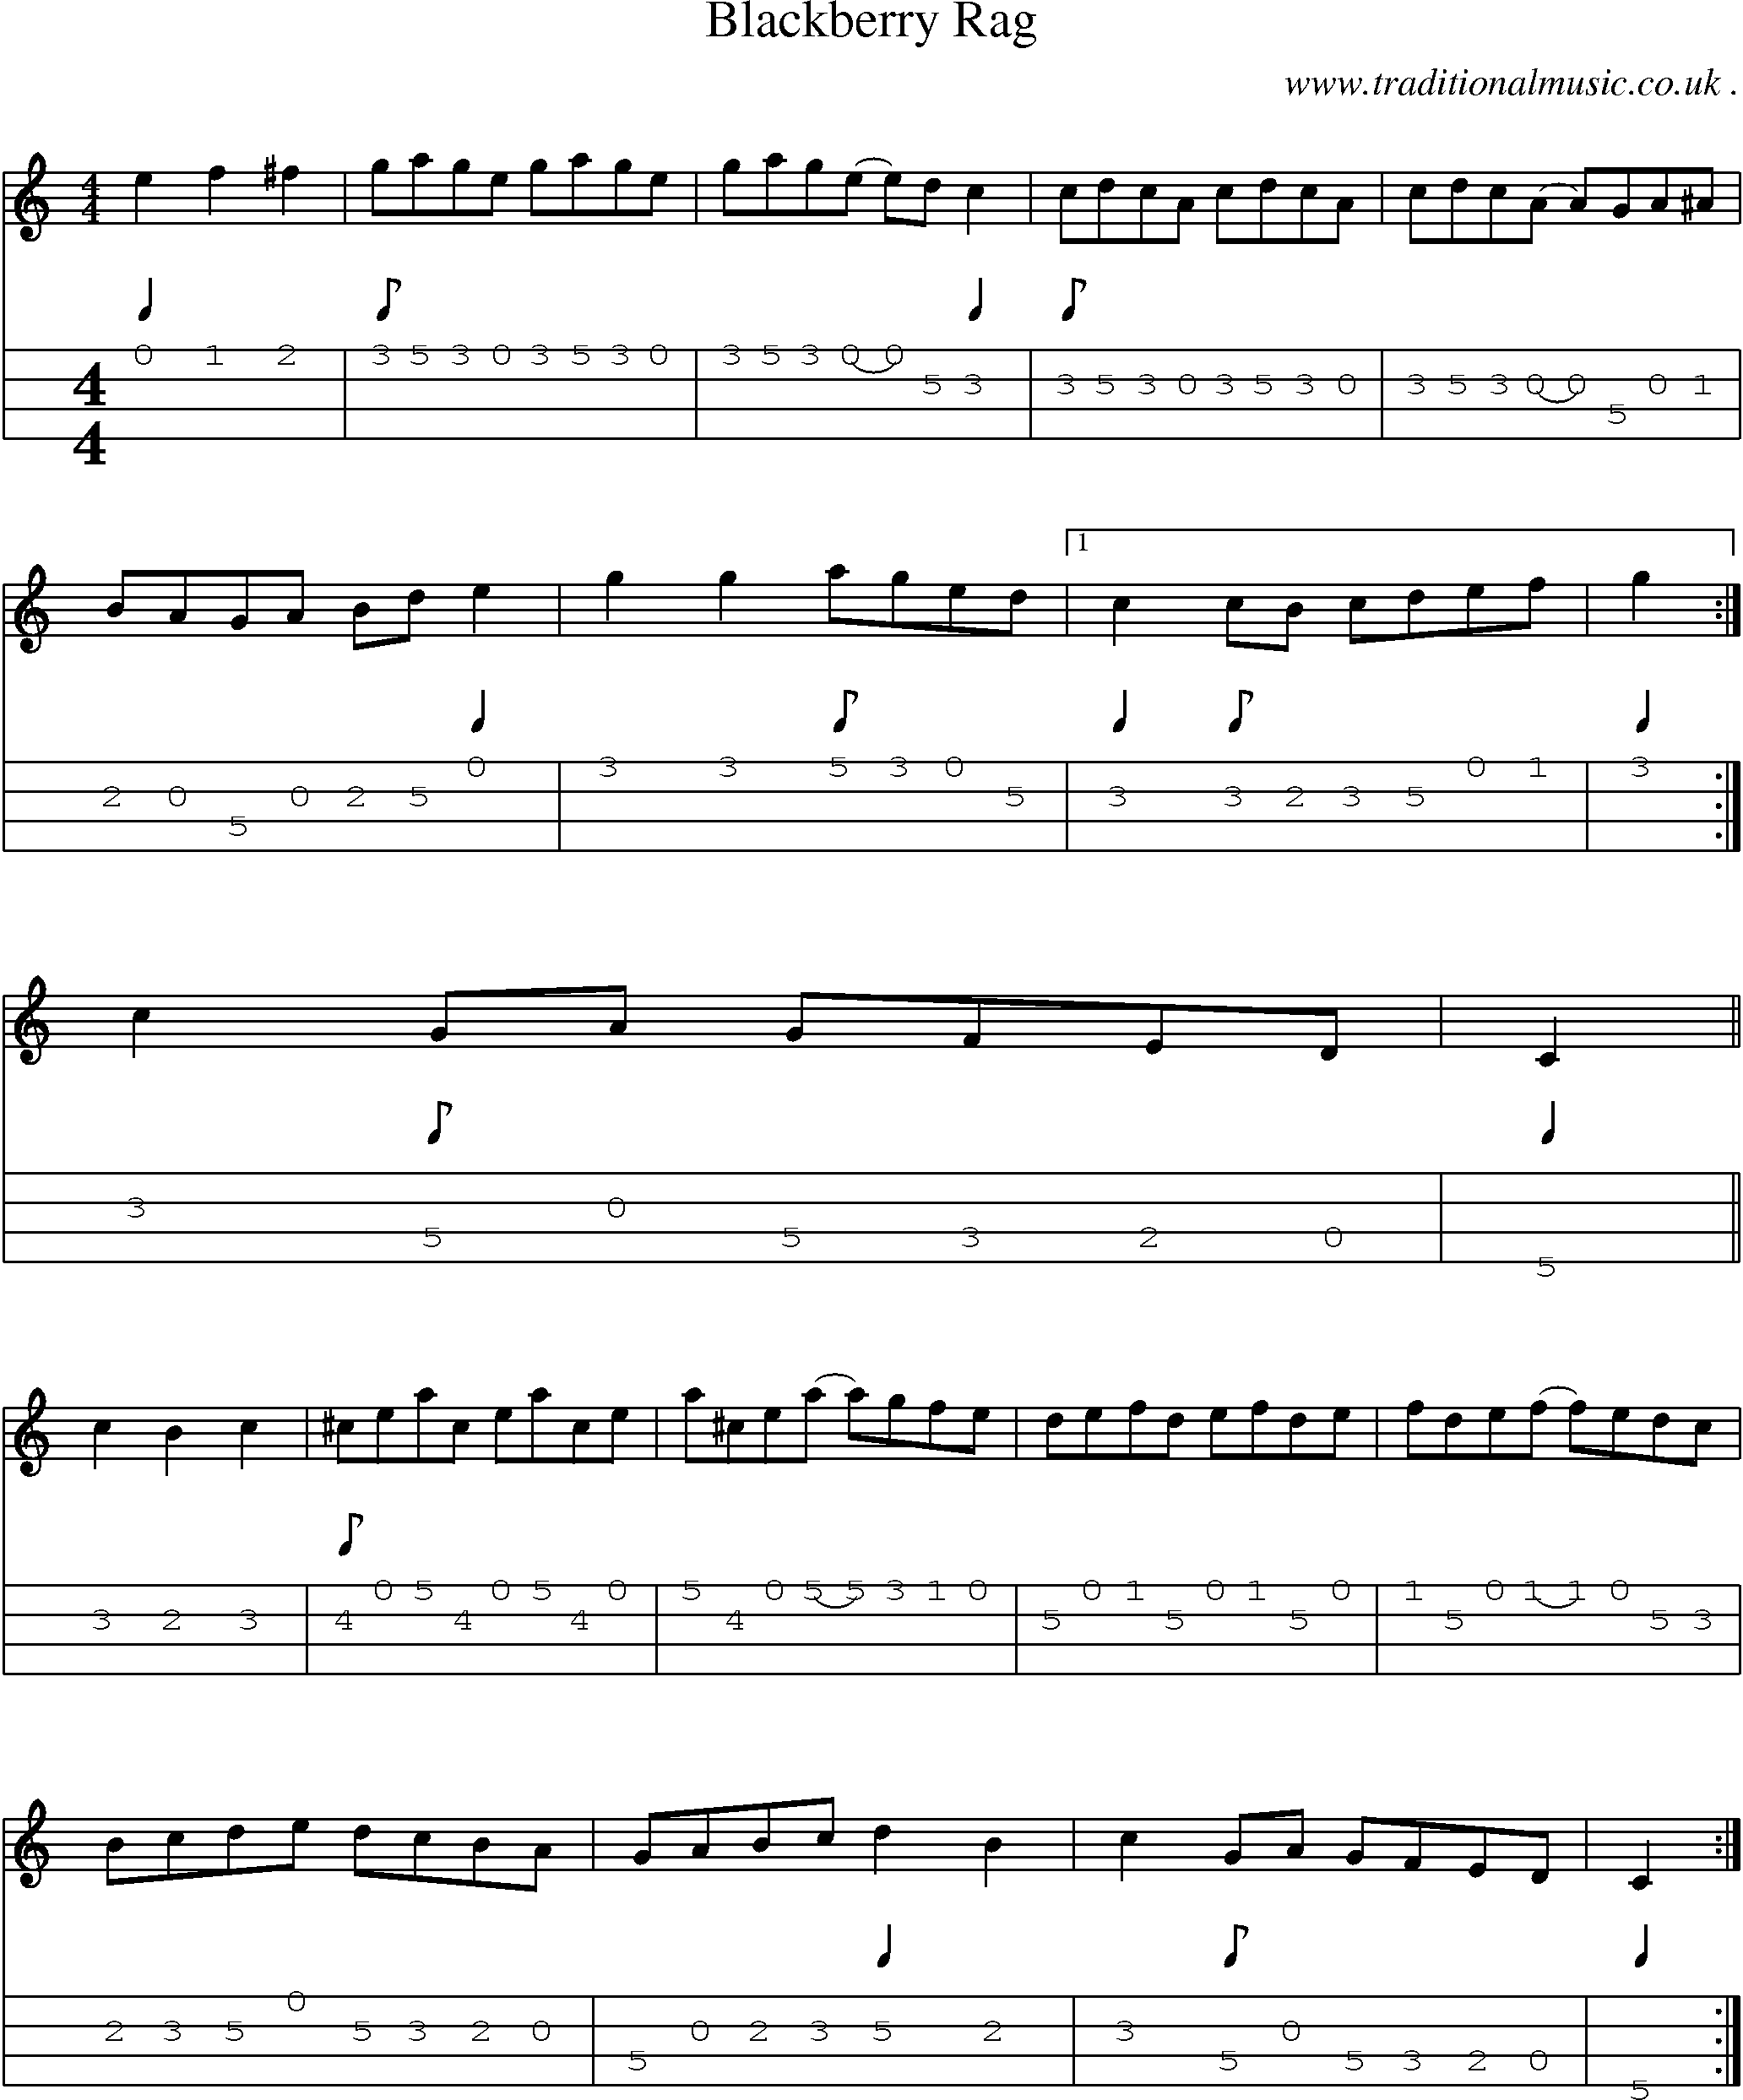 Music Score and Guitar Tabs for Blackberry Rag